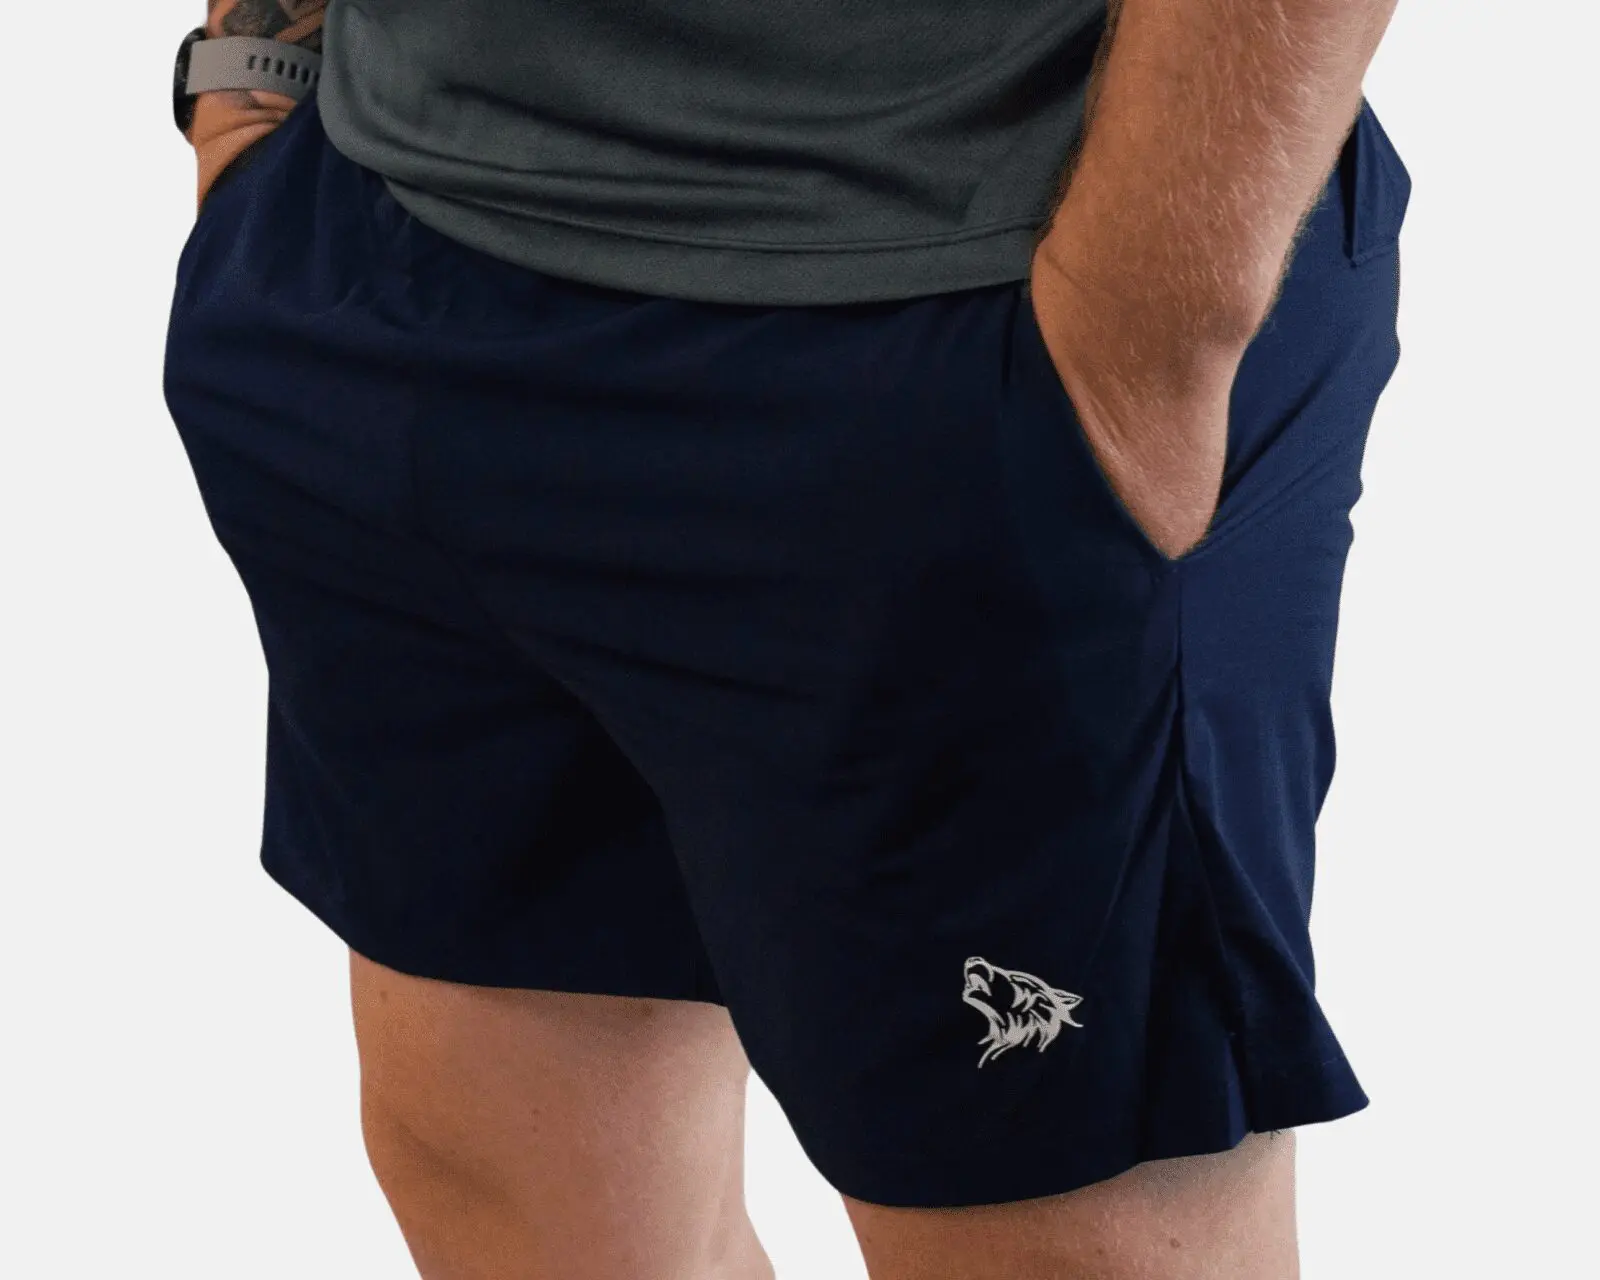 A man wearing dark blue shorts with an animal on the side.